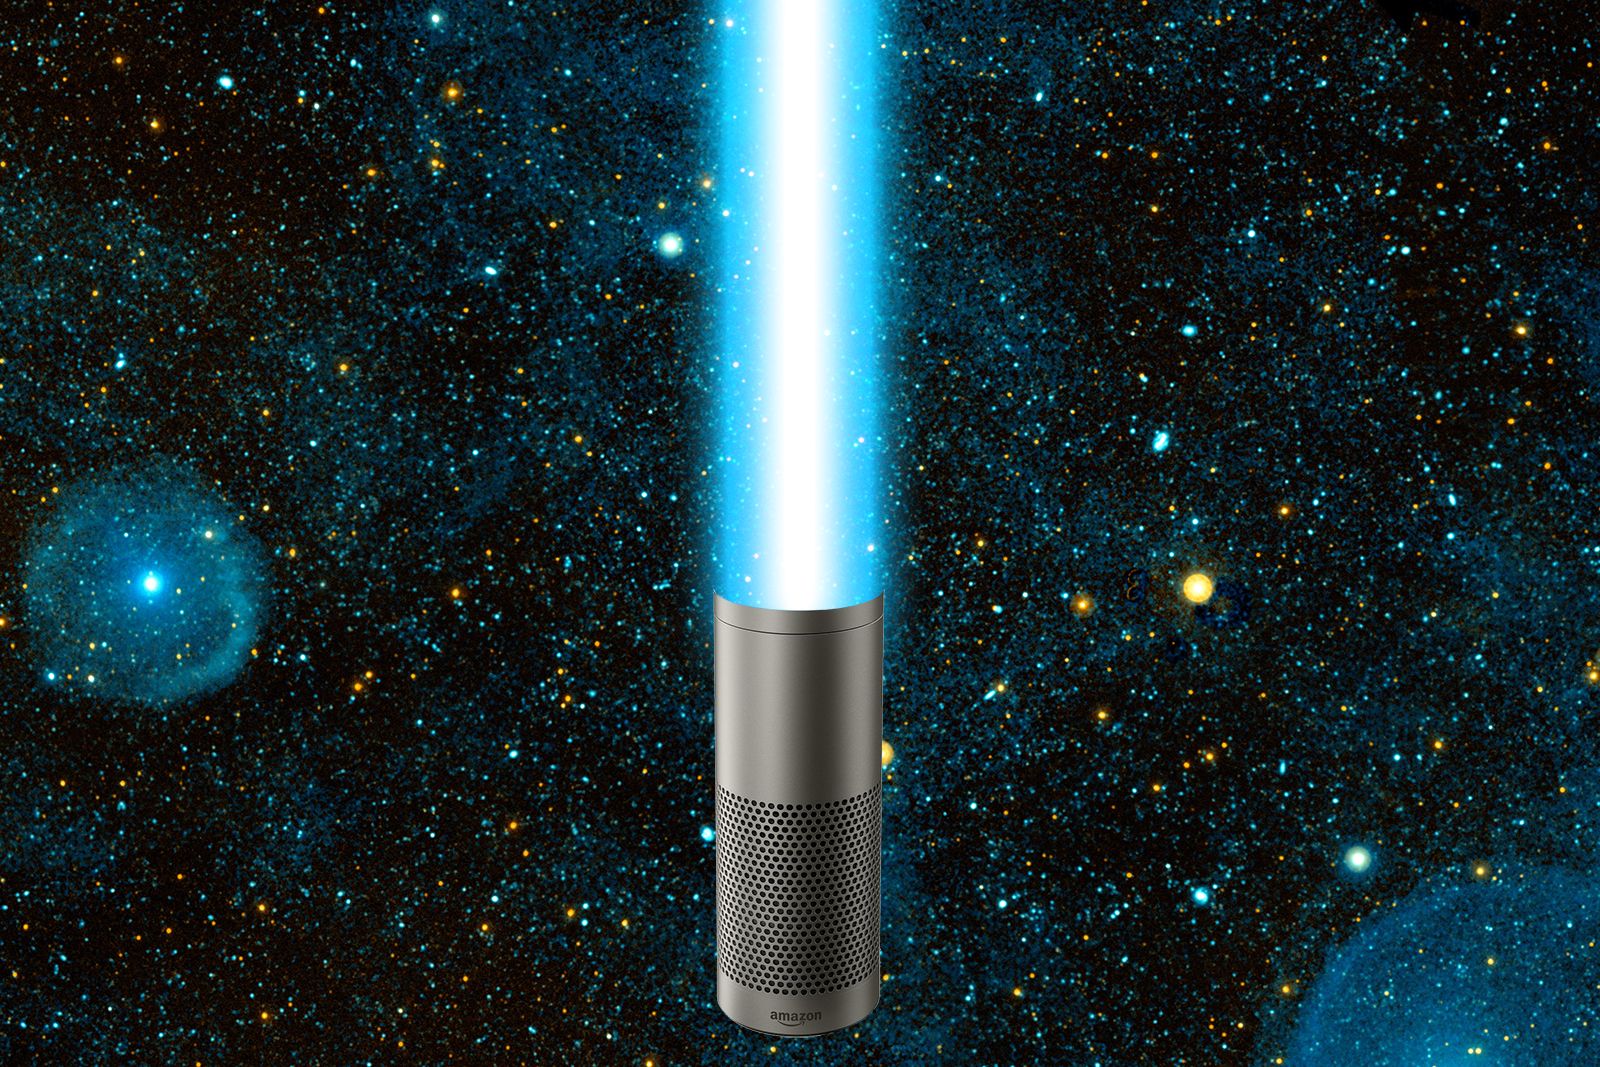 Things to ask Alexa on May the 4th Star Wars day image 1